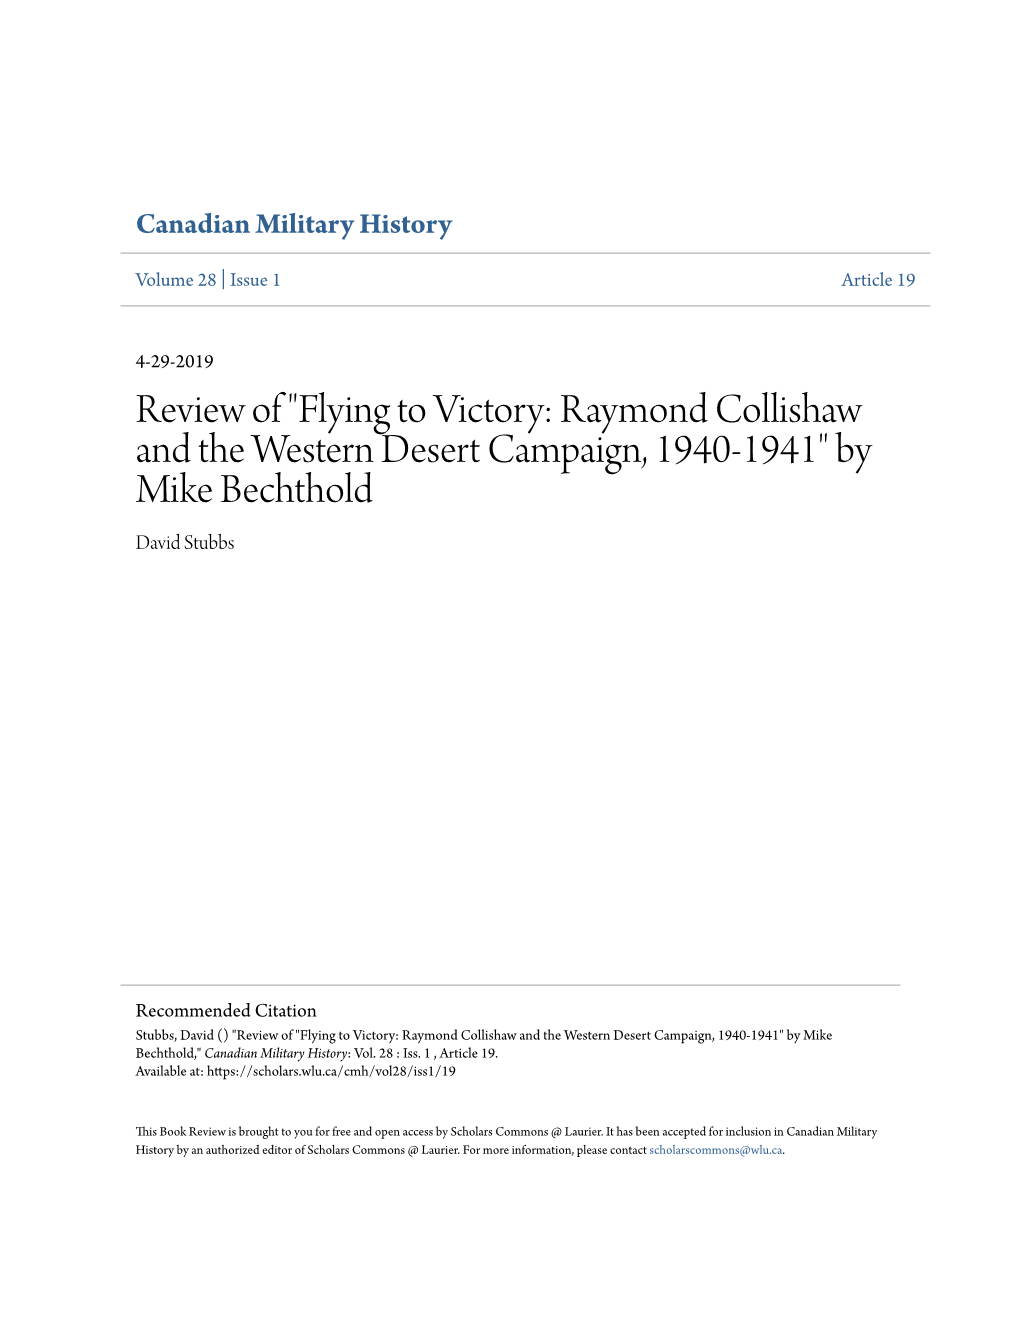 Flying to Victory: Raymond Collishaw and the Western Desert Campaign, 1940-1941" by Mike Bechthold David Stubbs